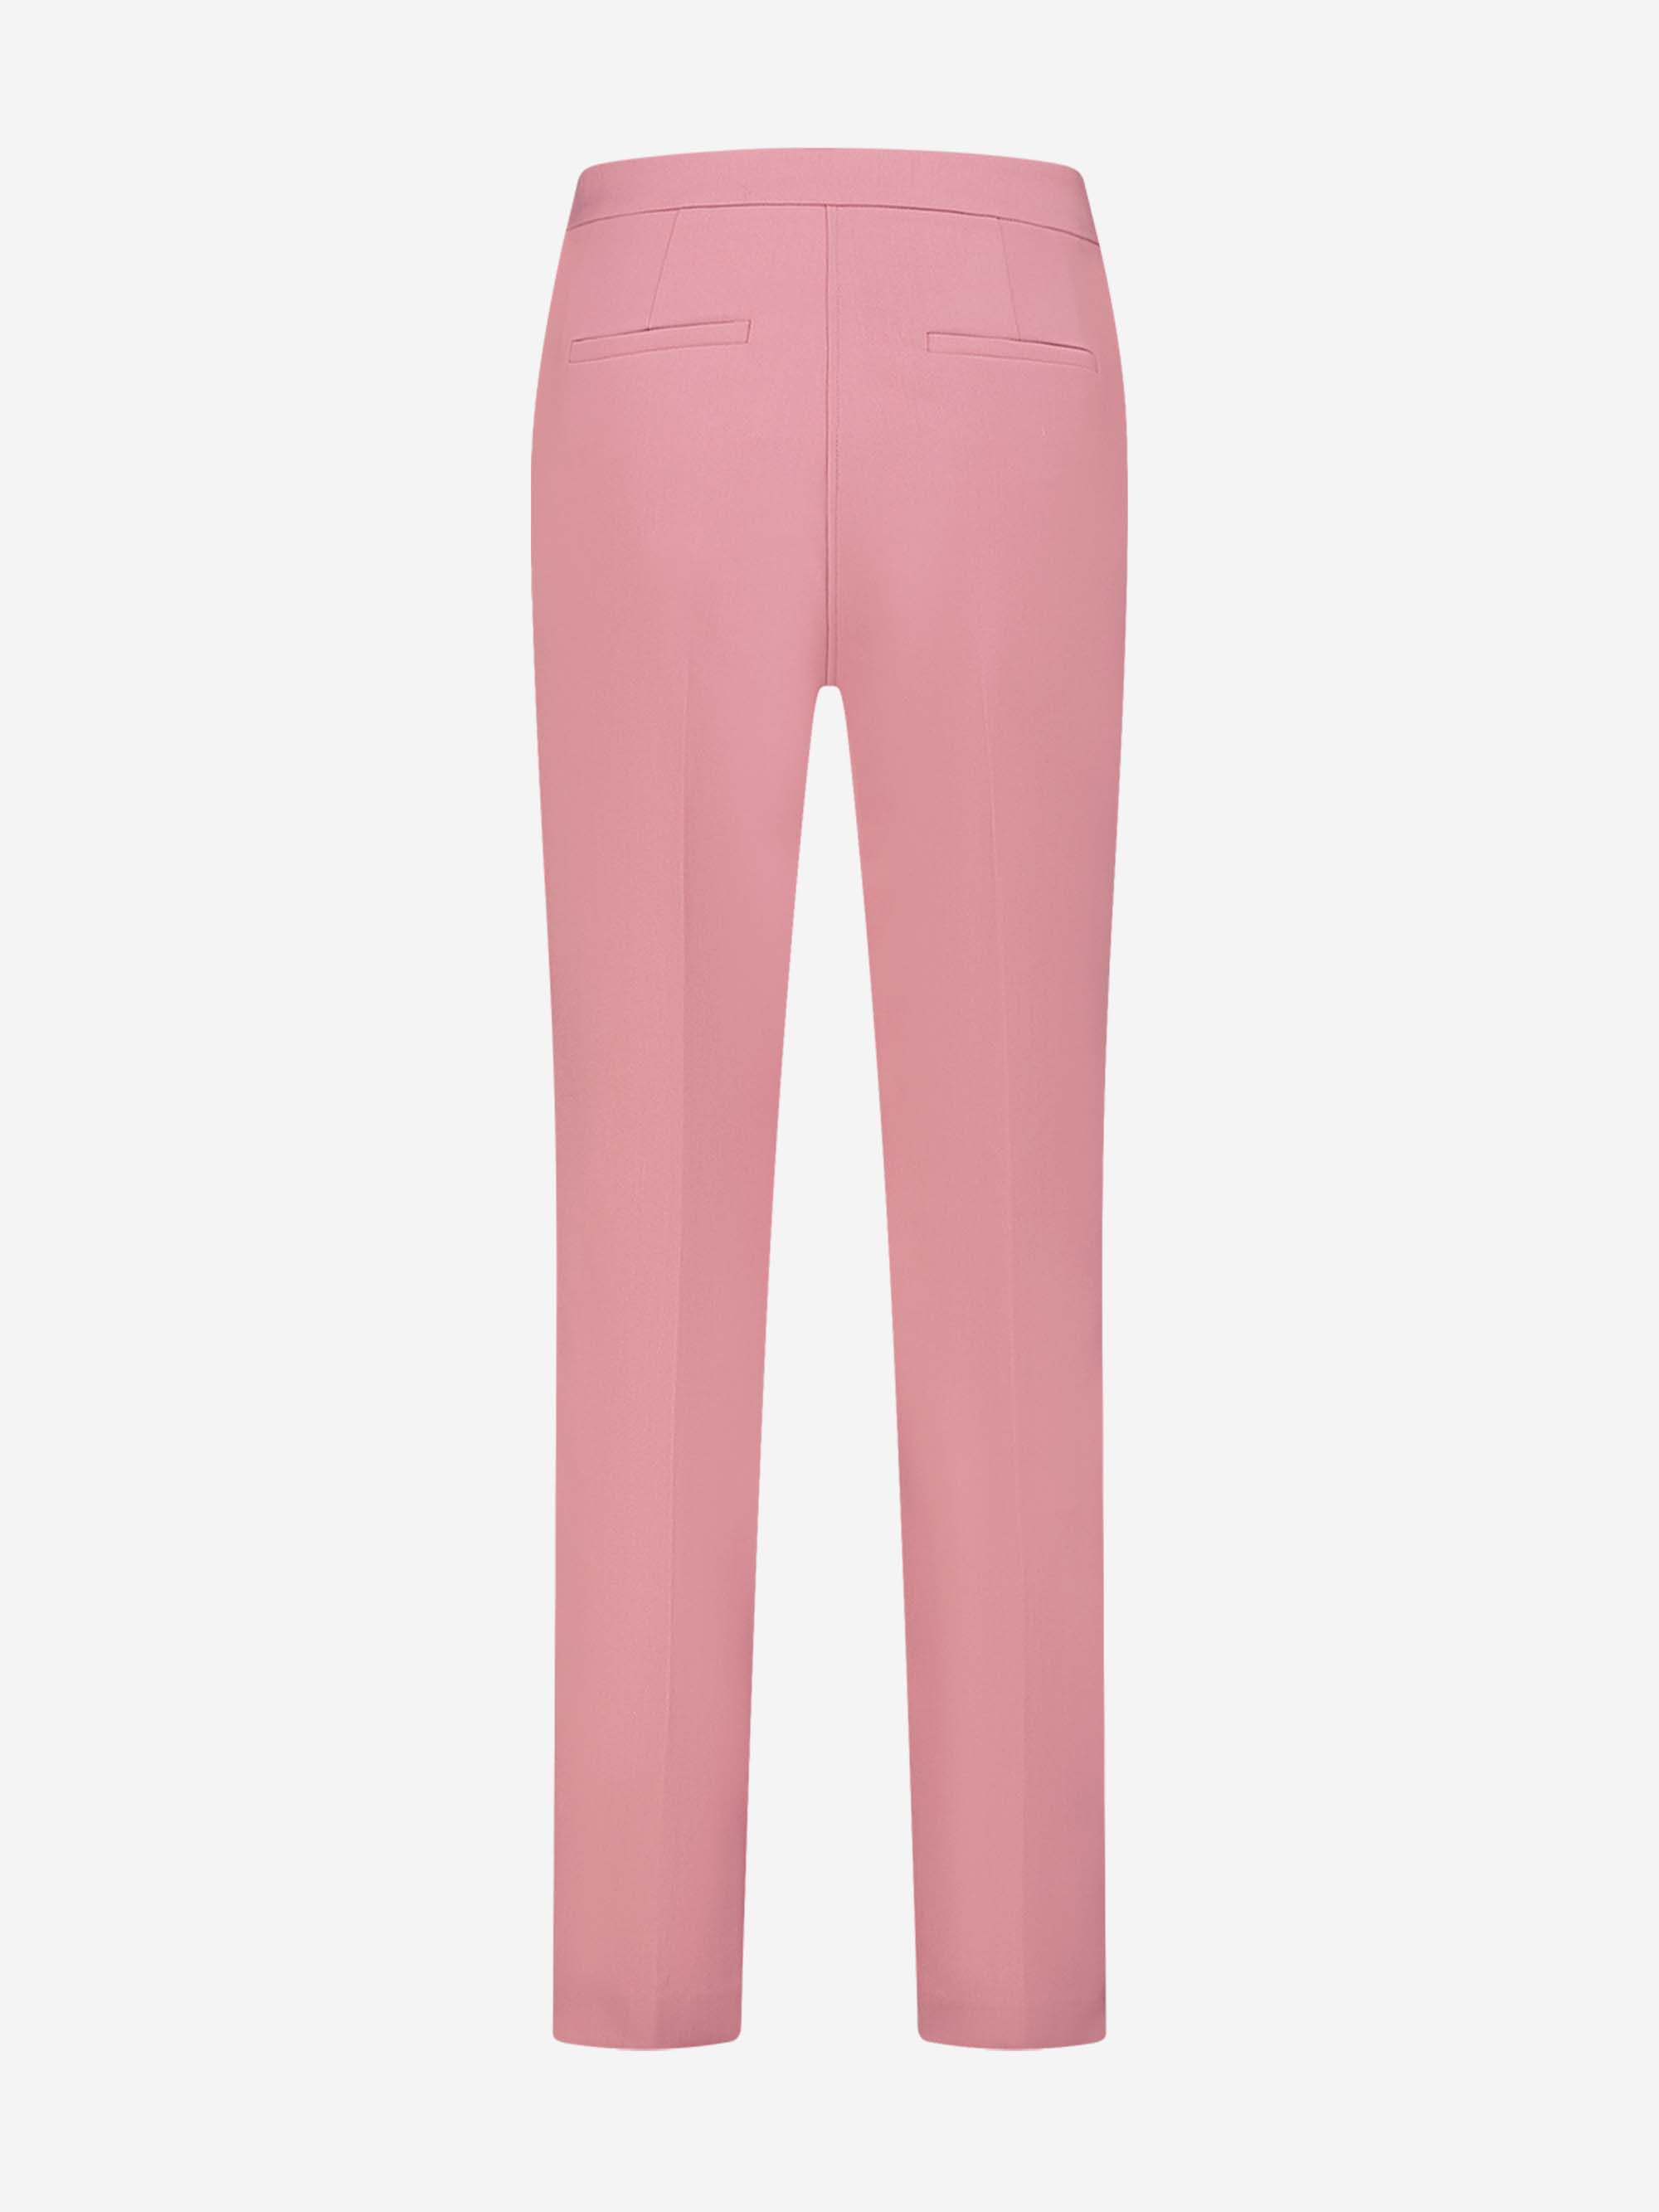 Fitted trousers with mid rise